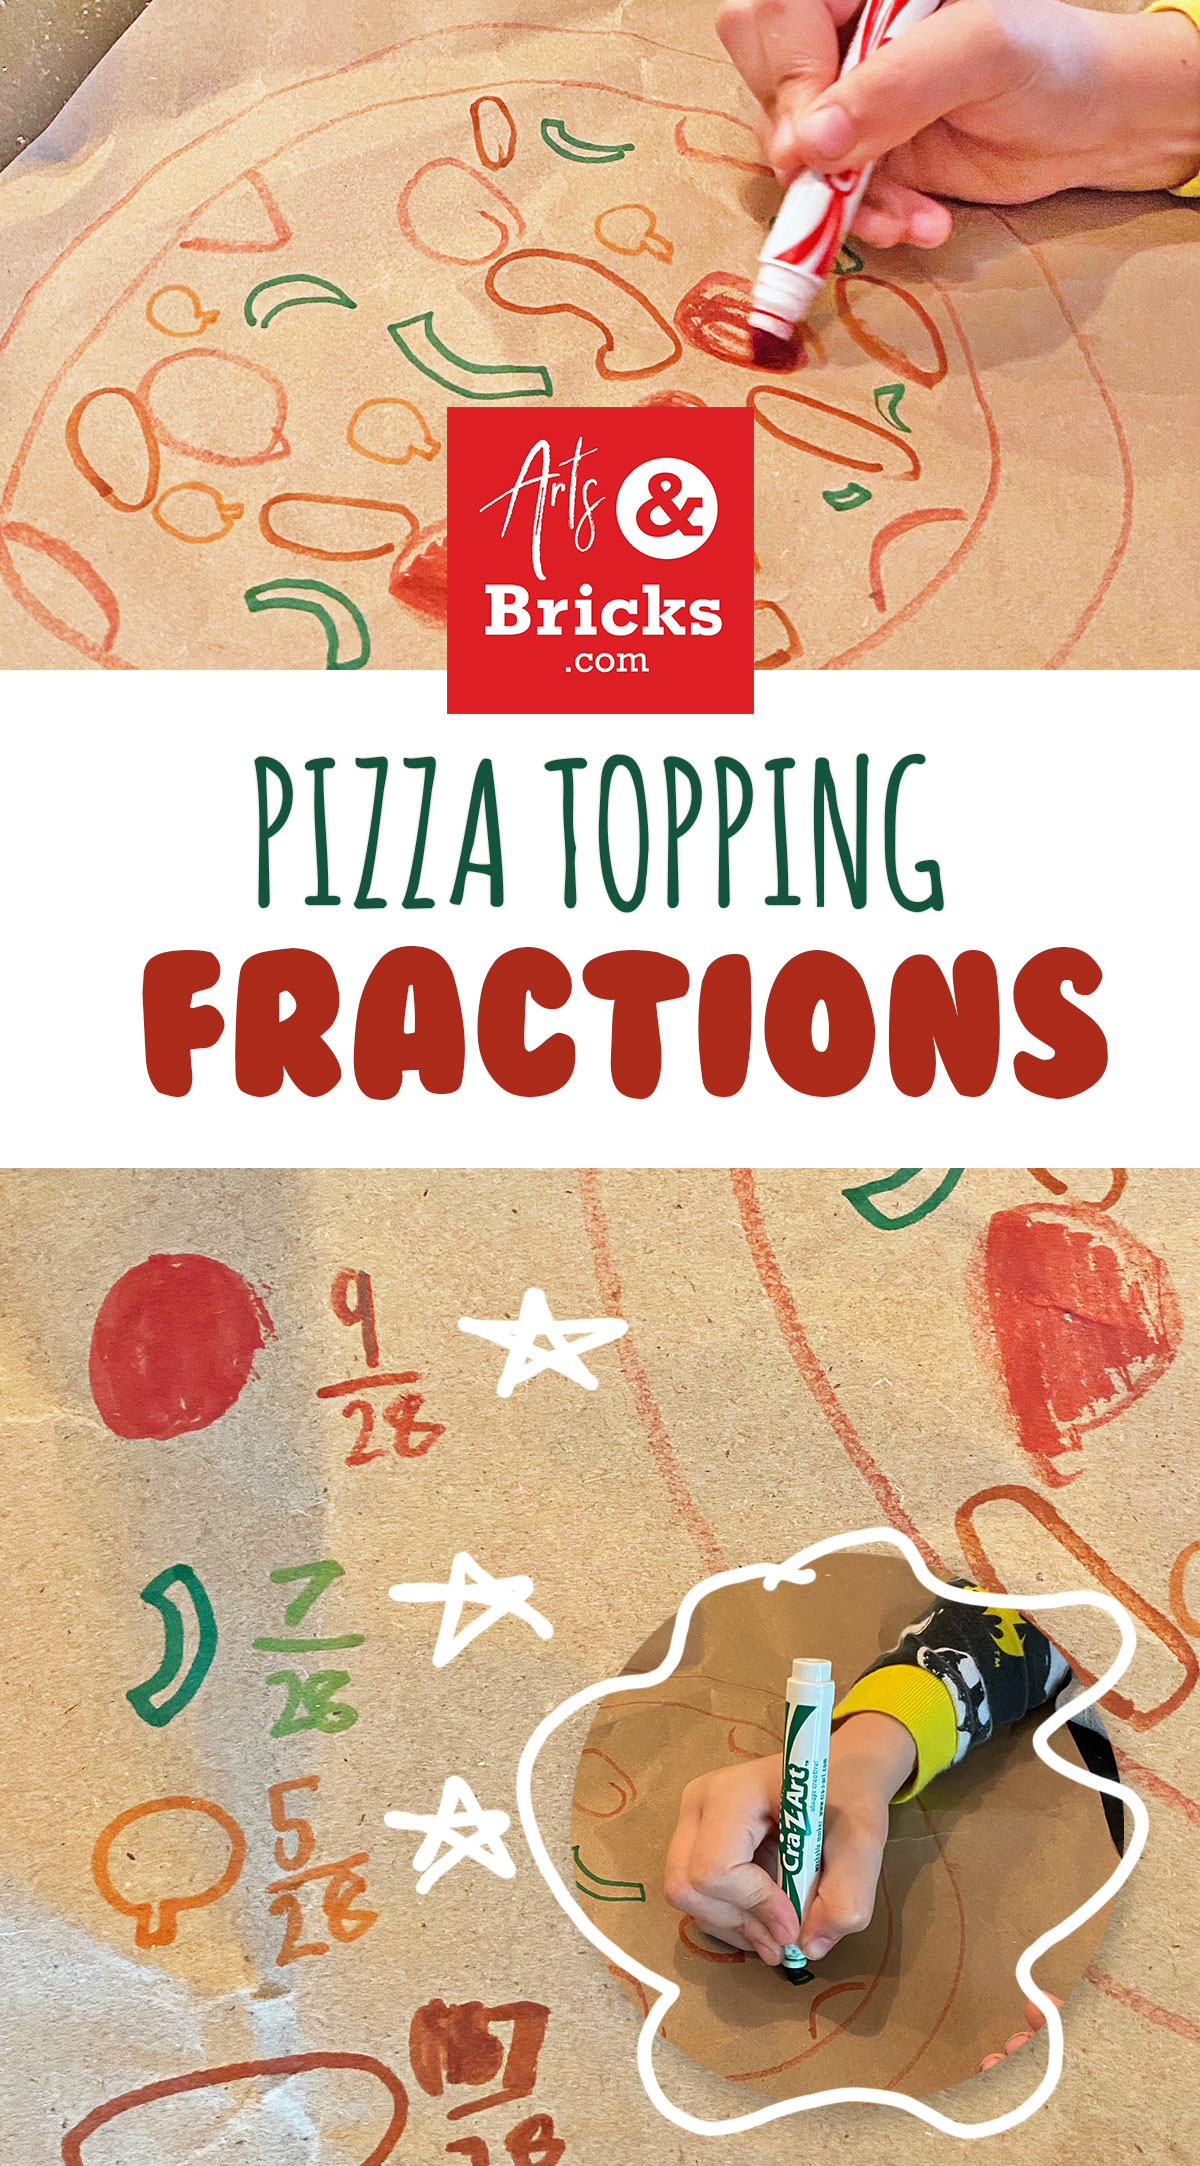 With virtually no prep, this simple pizza topping fractions math activity is a perfect short activity for students just learning about fractions. It gives students a visual way to count and understand the concept of numerators and denominators. #playful #steam #stem #drawit #homeschool #teachfractions #fractions #pizza #math